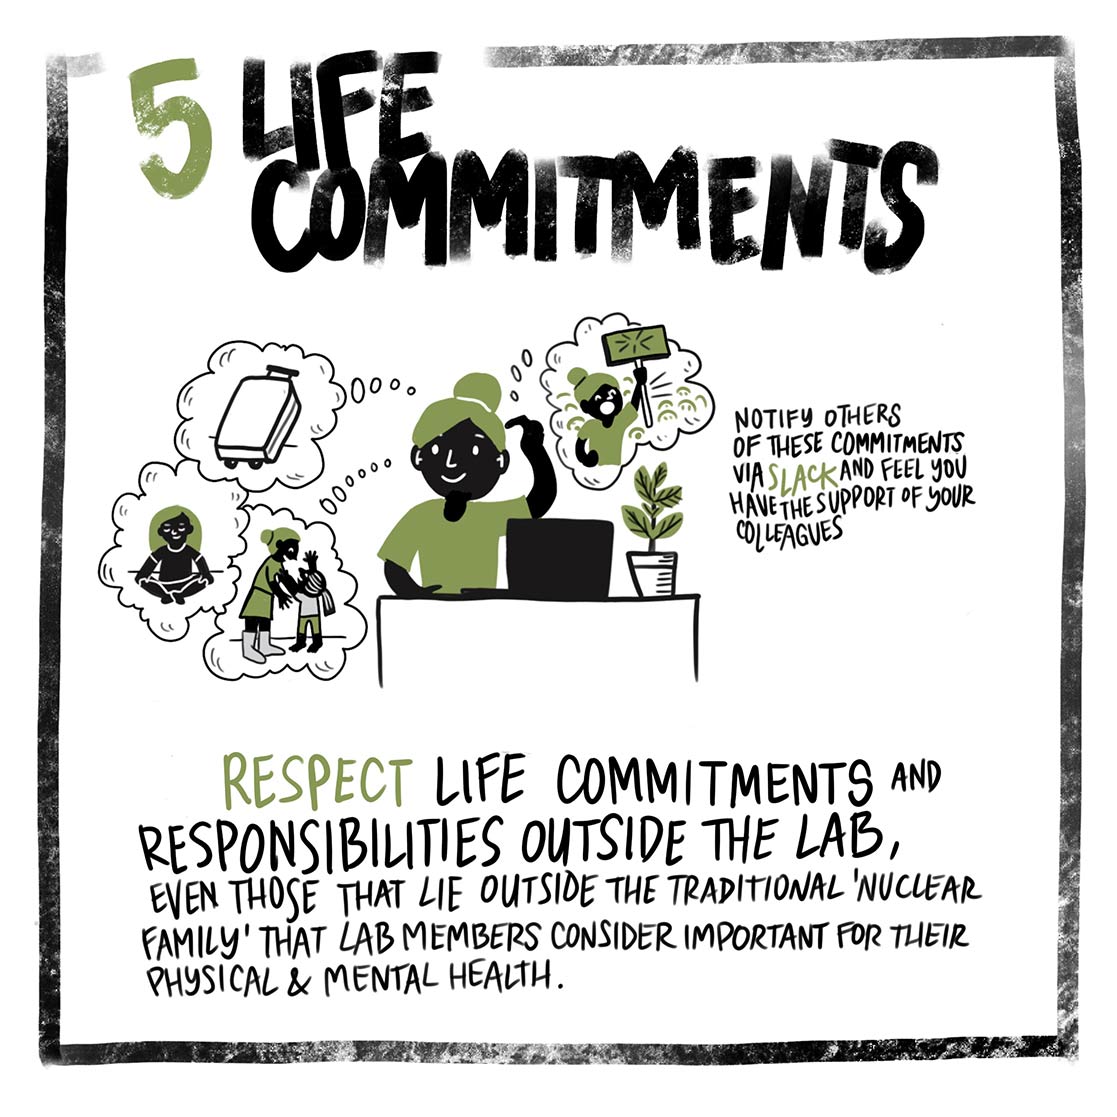 5. Making room for life commitments that are important to the mental and physical well-being of our lab members ...